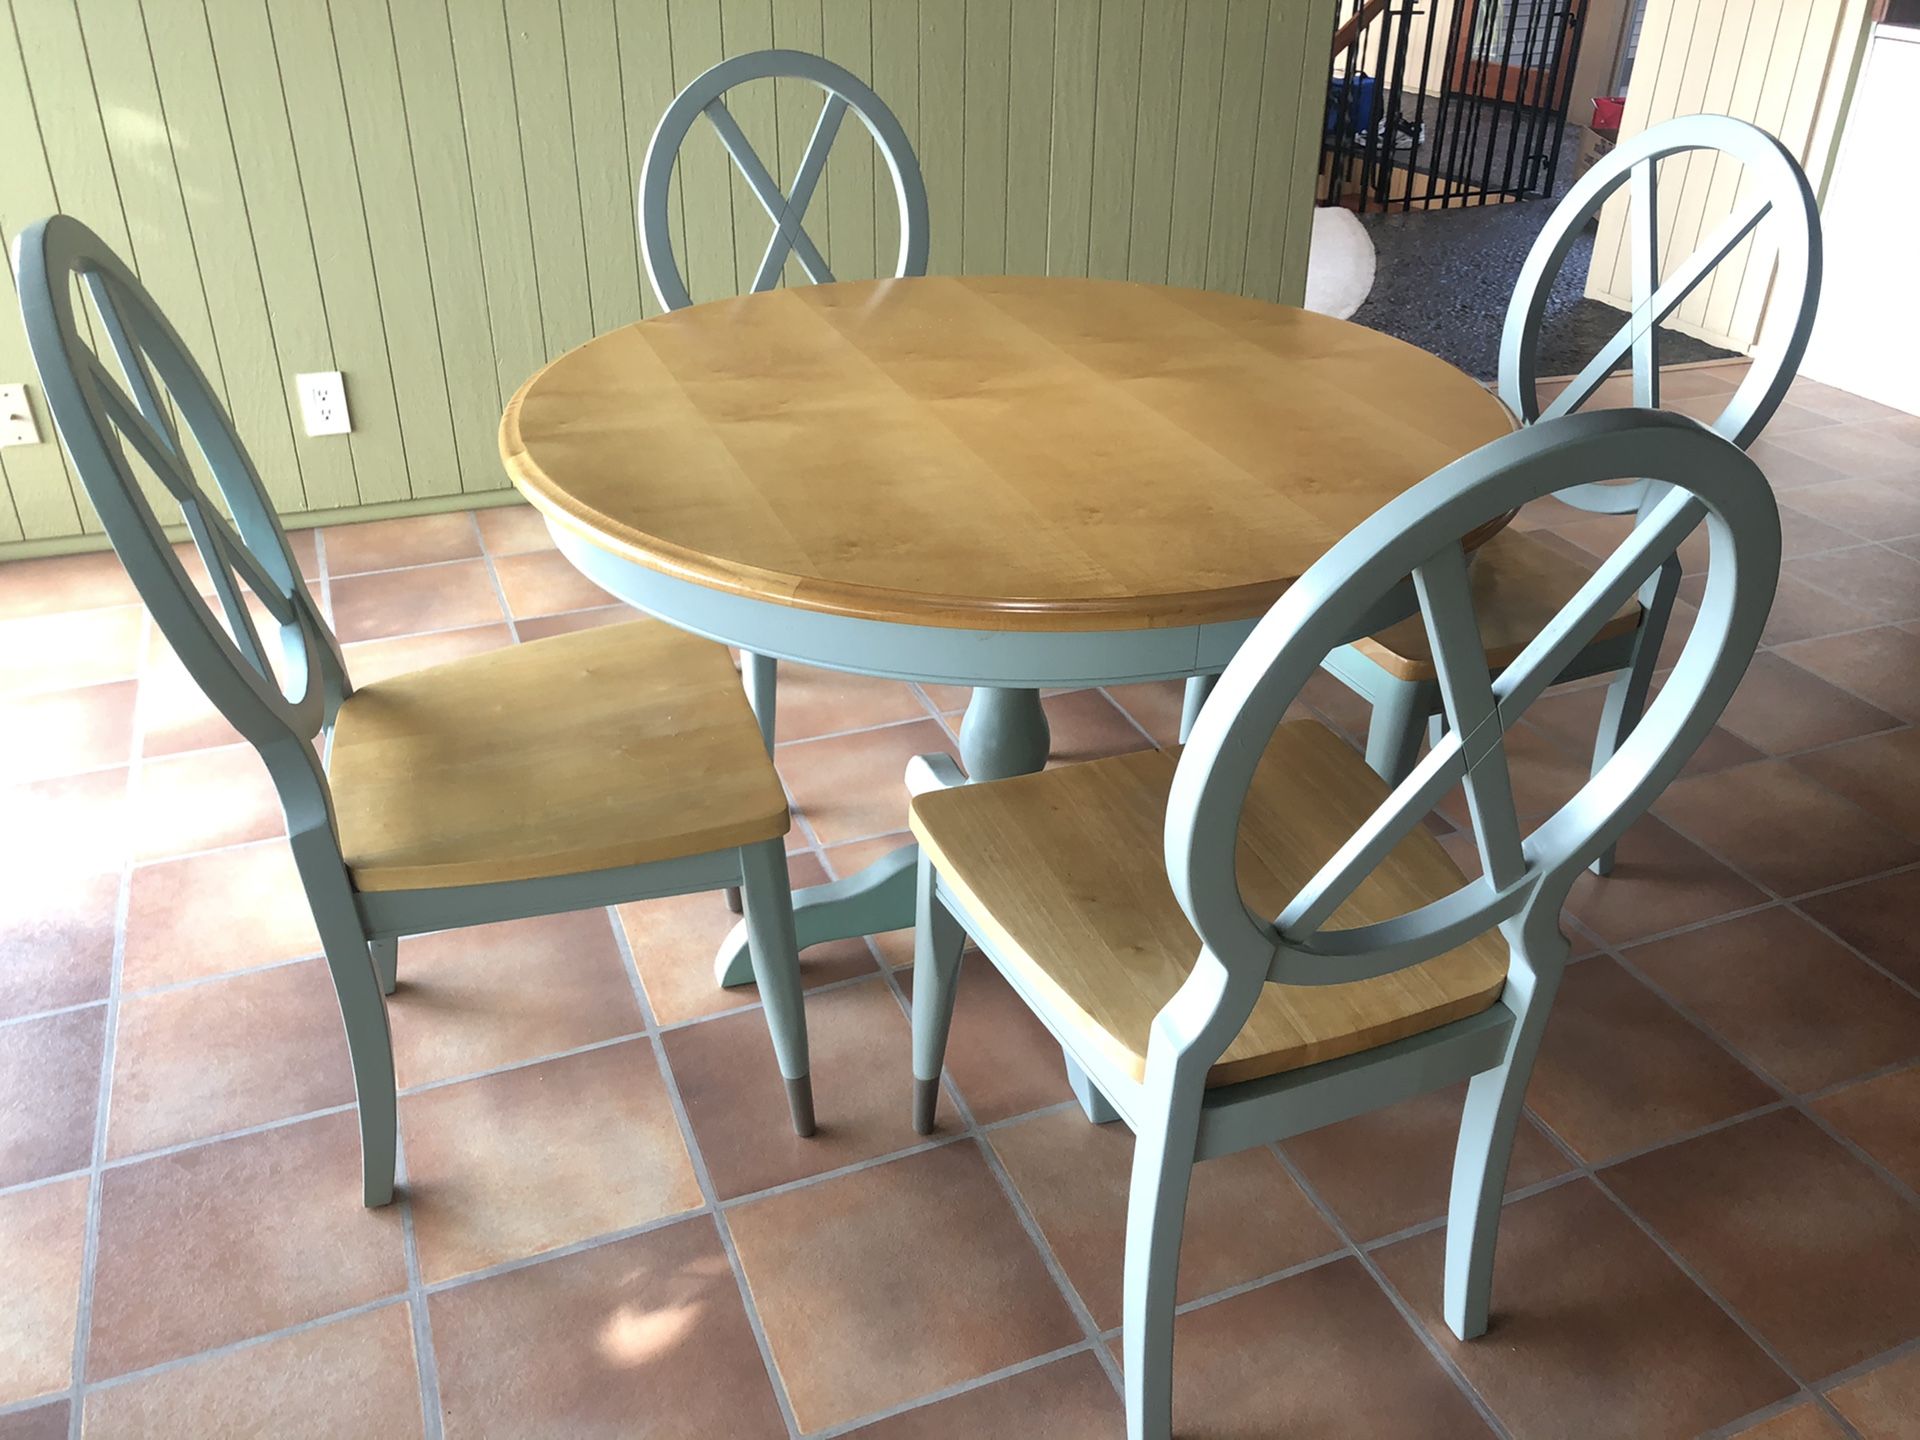 Kitchen table and chairs green, Bassett